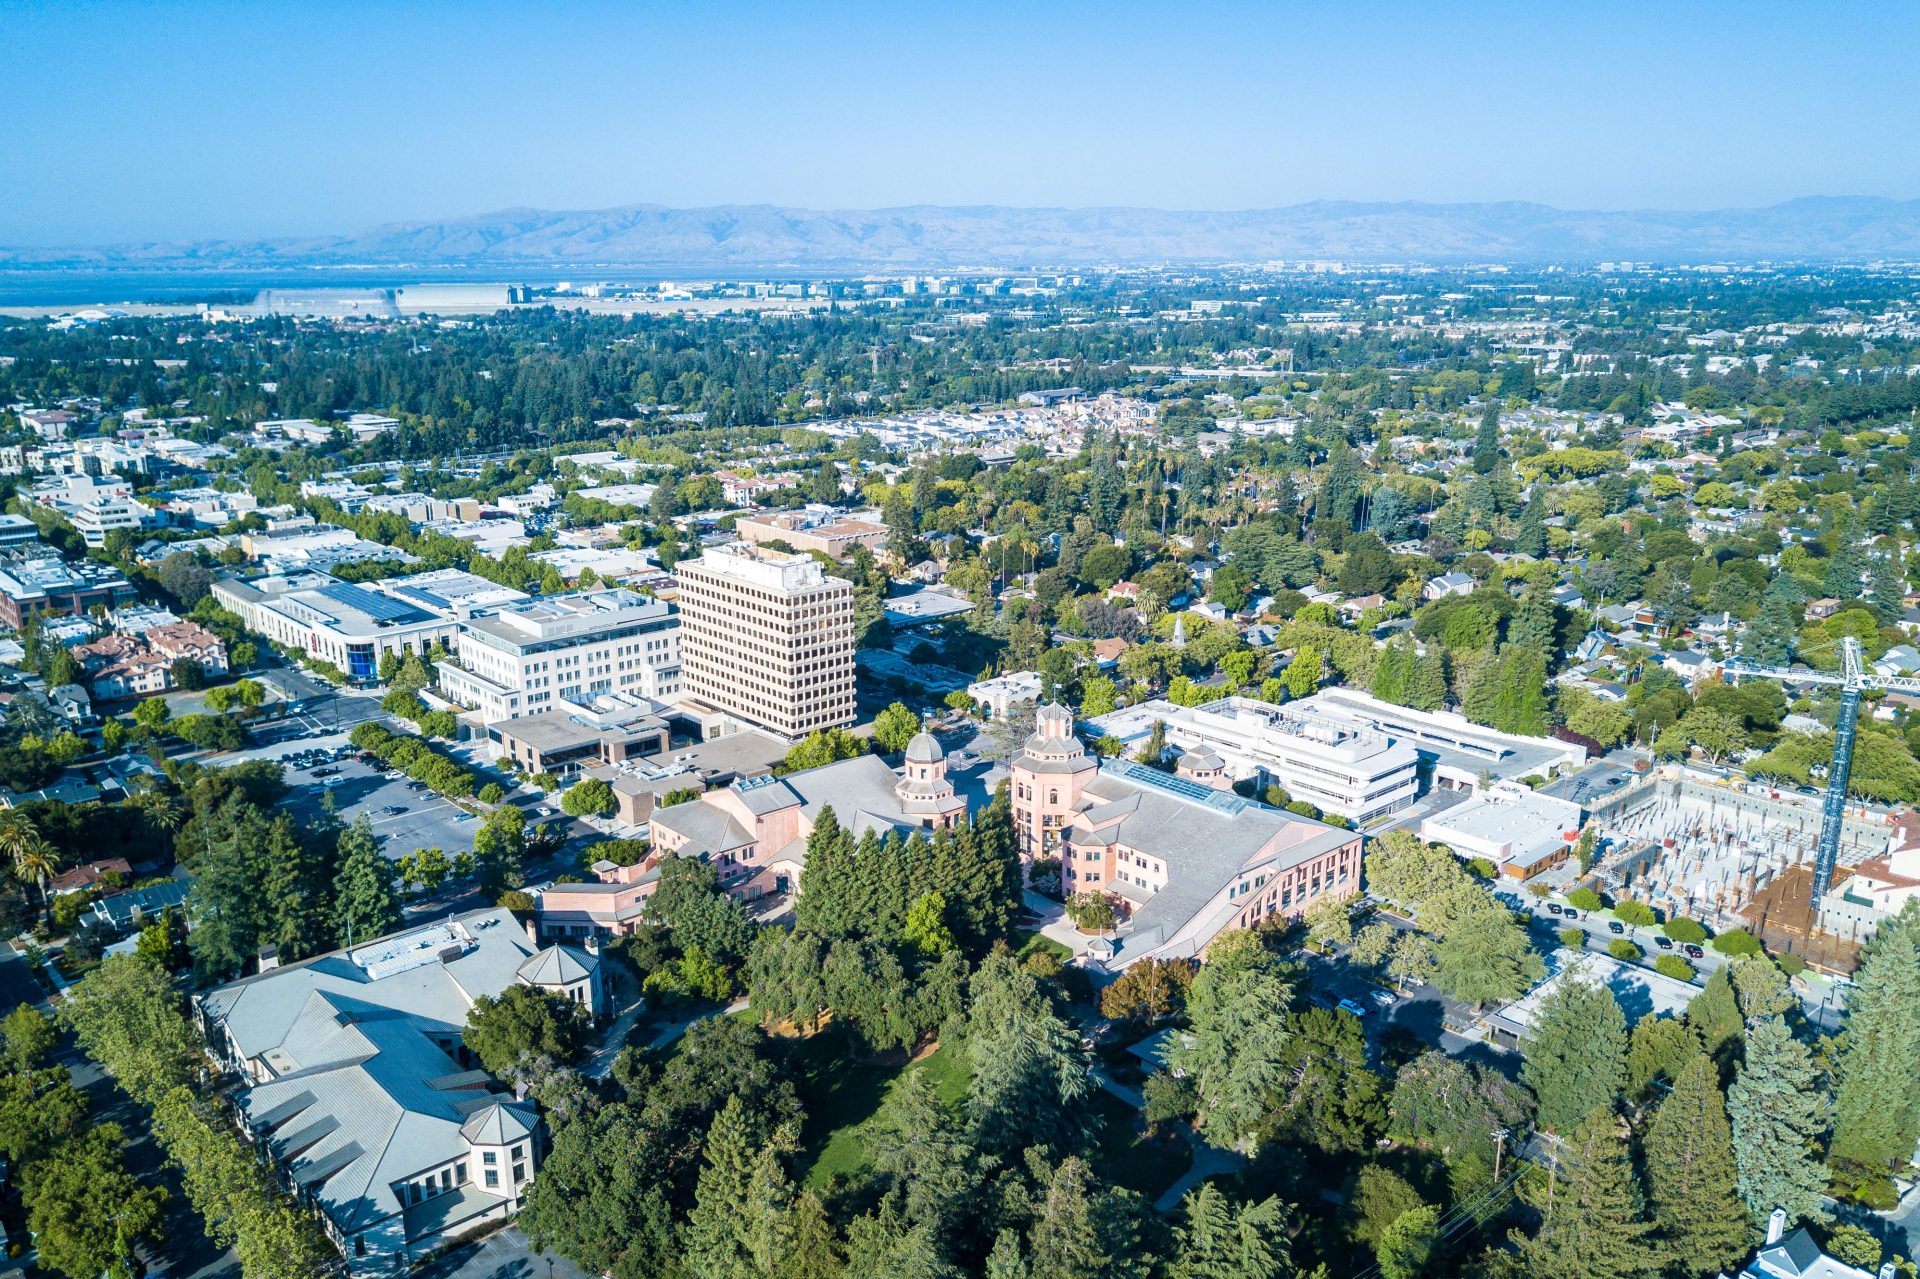 Drone view of  downtown Mountain View in California